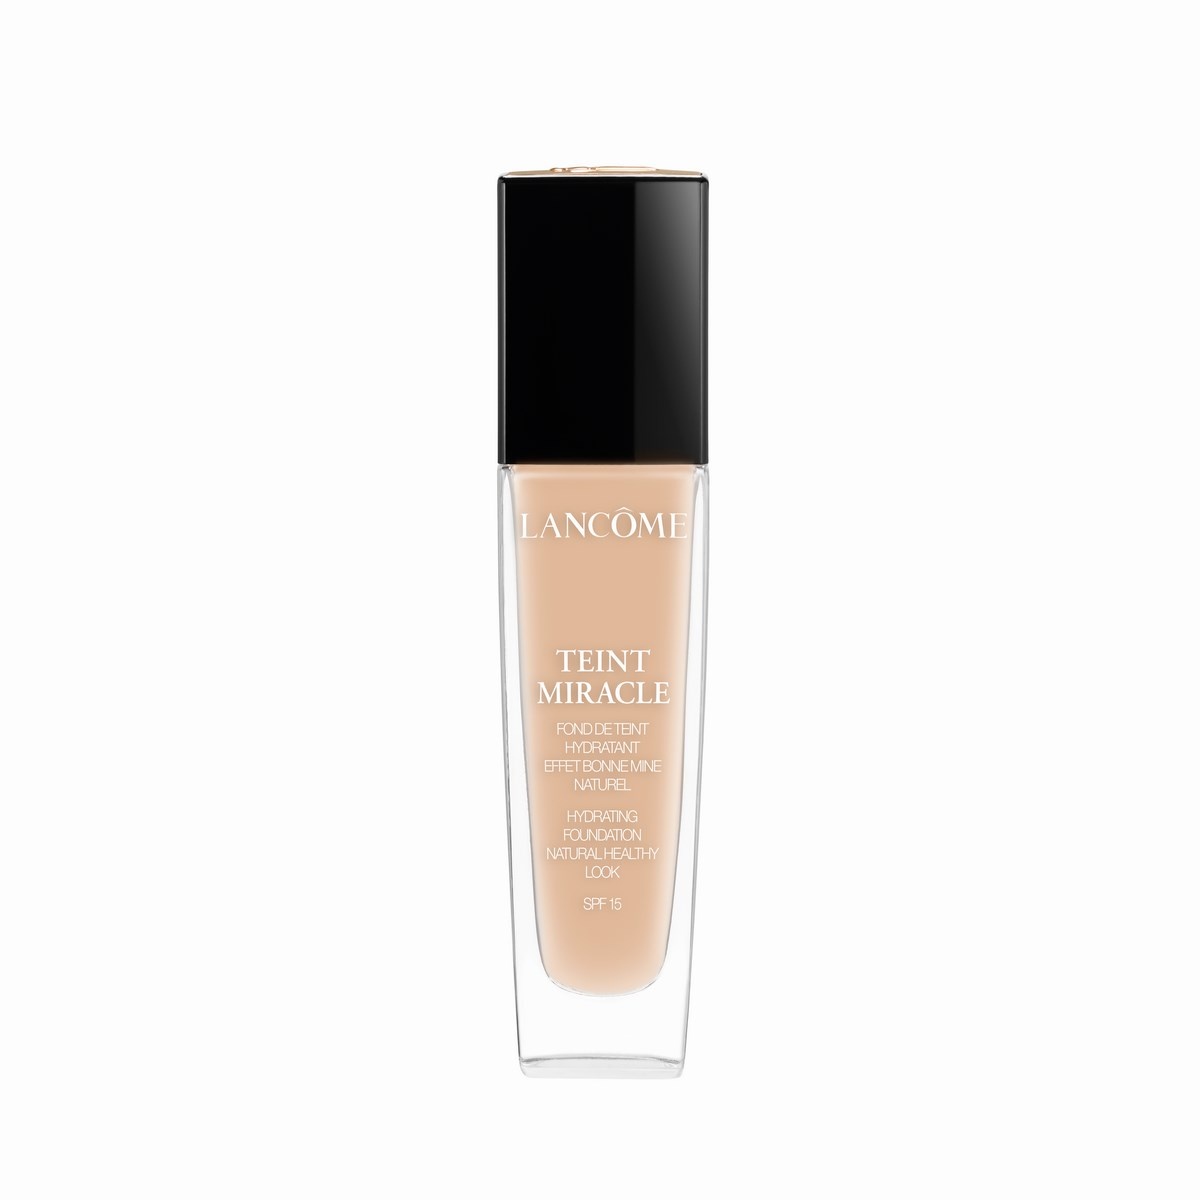  Teint Miracle Hydrating Foundation